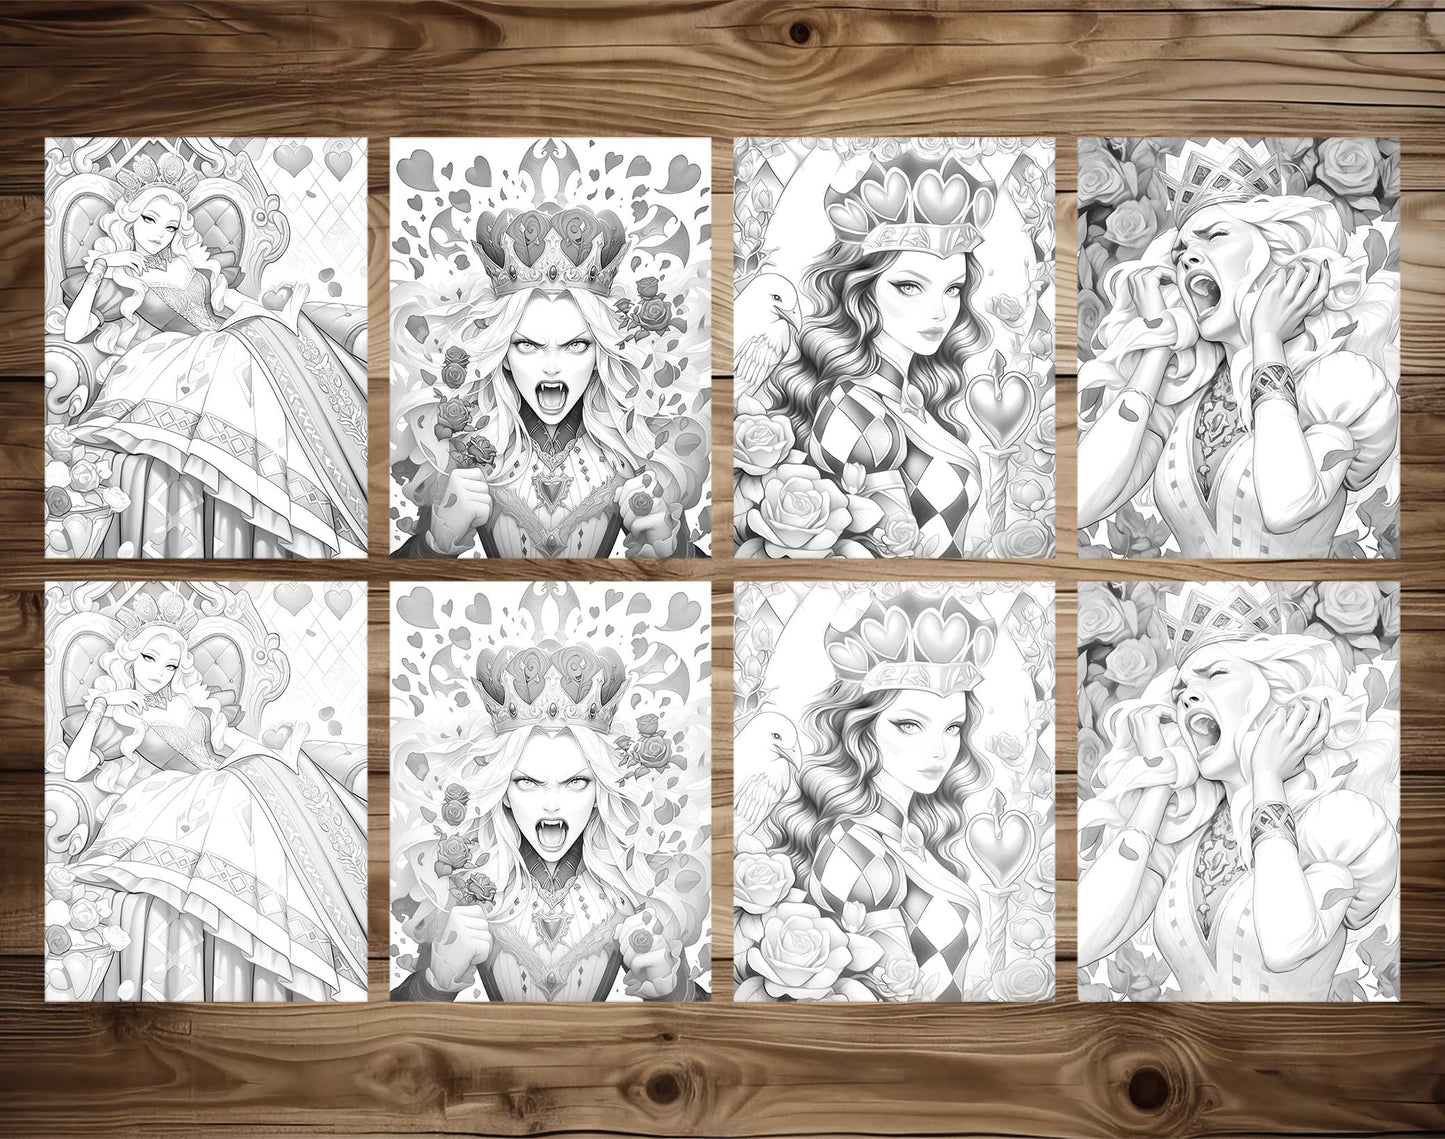 50 The Queen of Heart Grayscale Coloring Pages - Instant Download - Printable PDF Dark/Light